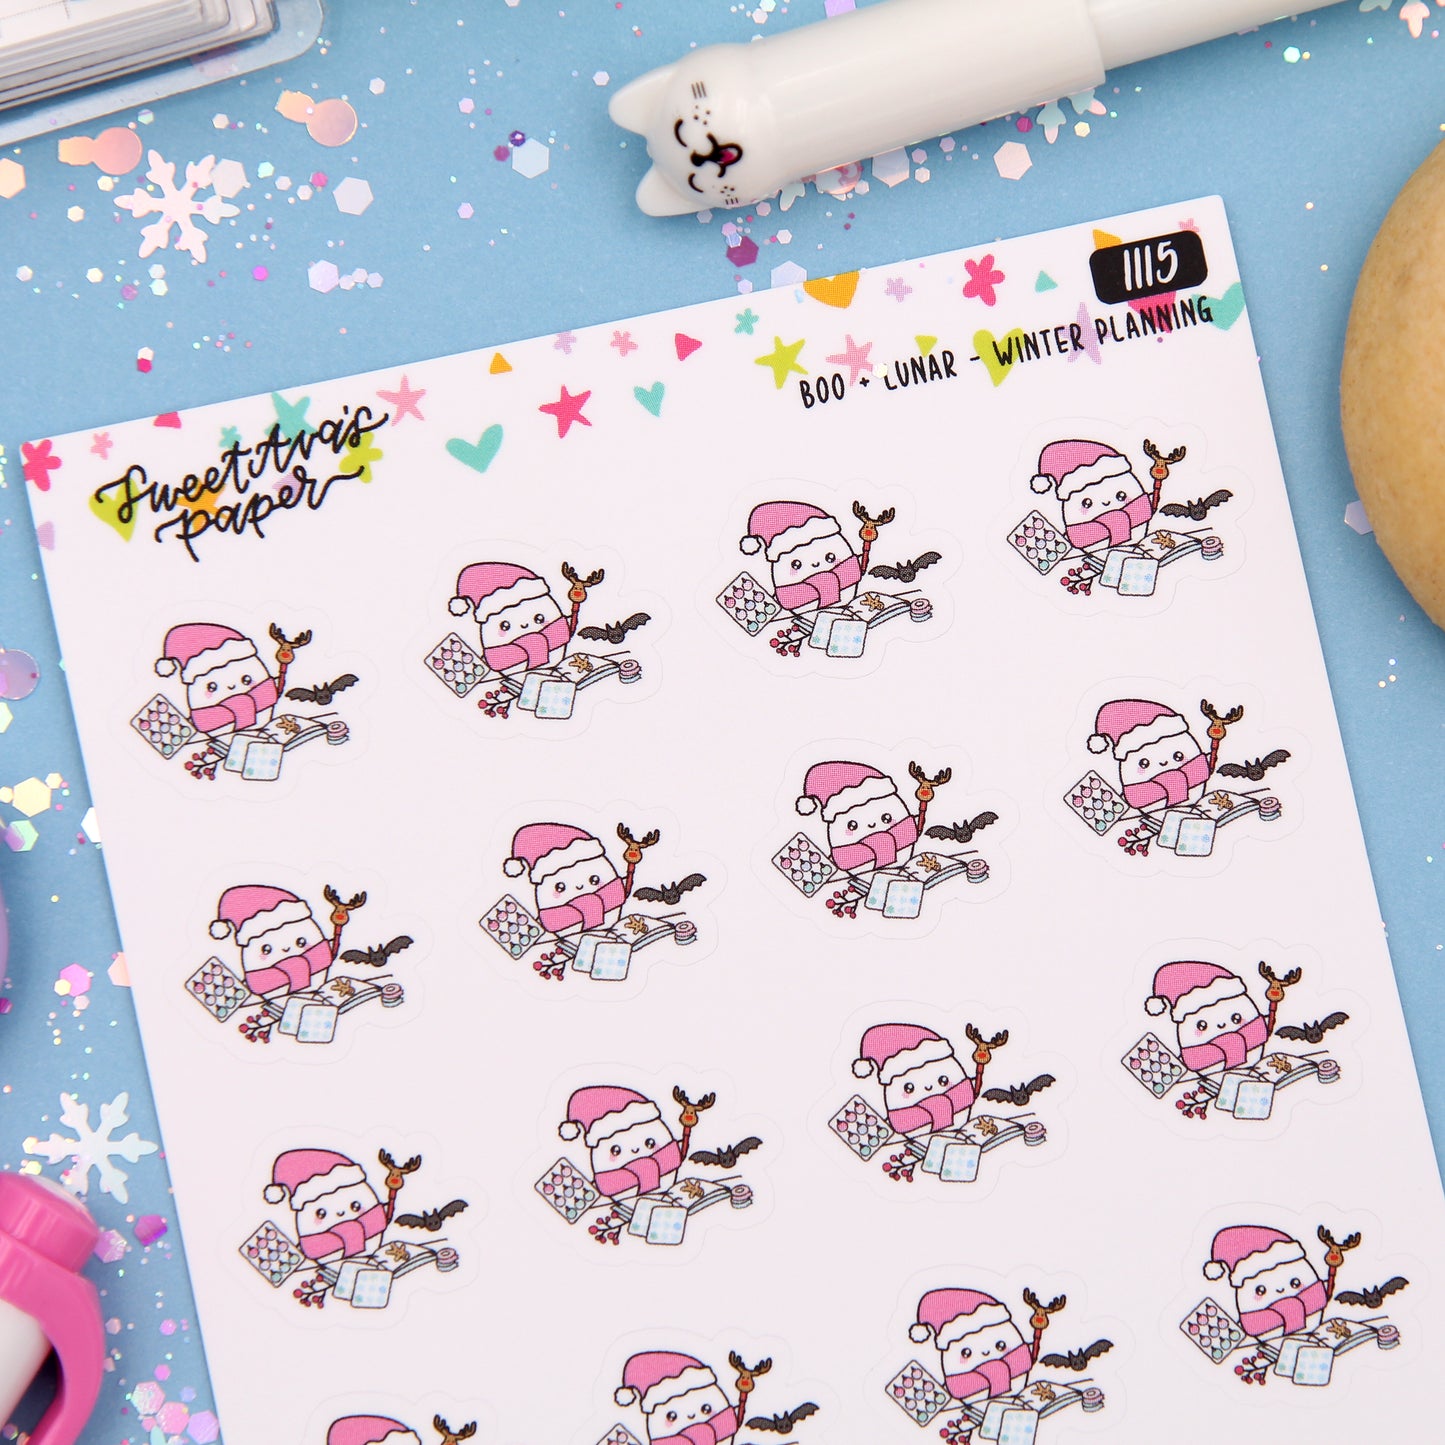 Winter Planning Planner Stickers - Boo and Lunar - [1115]